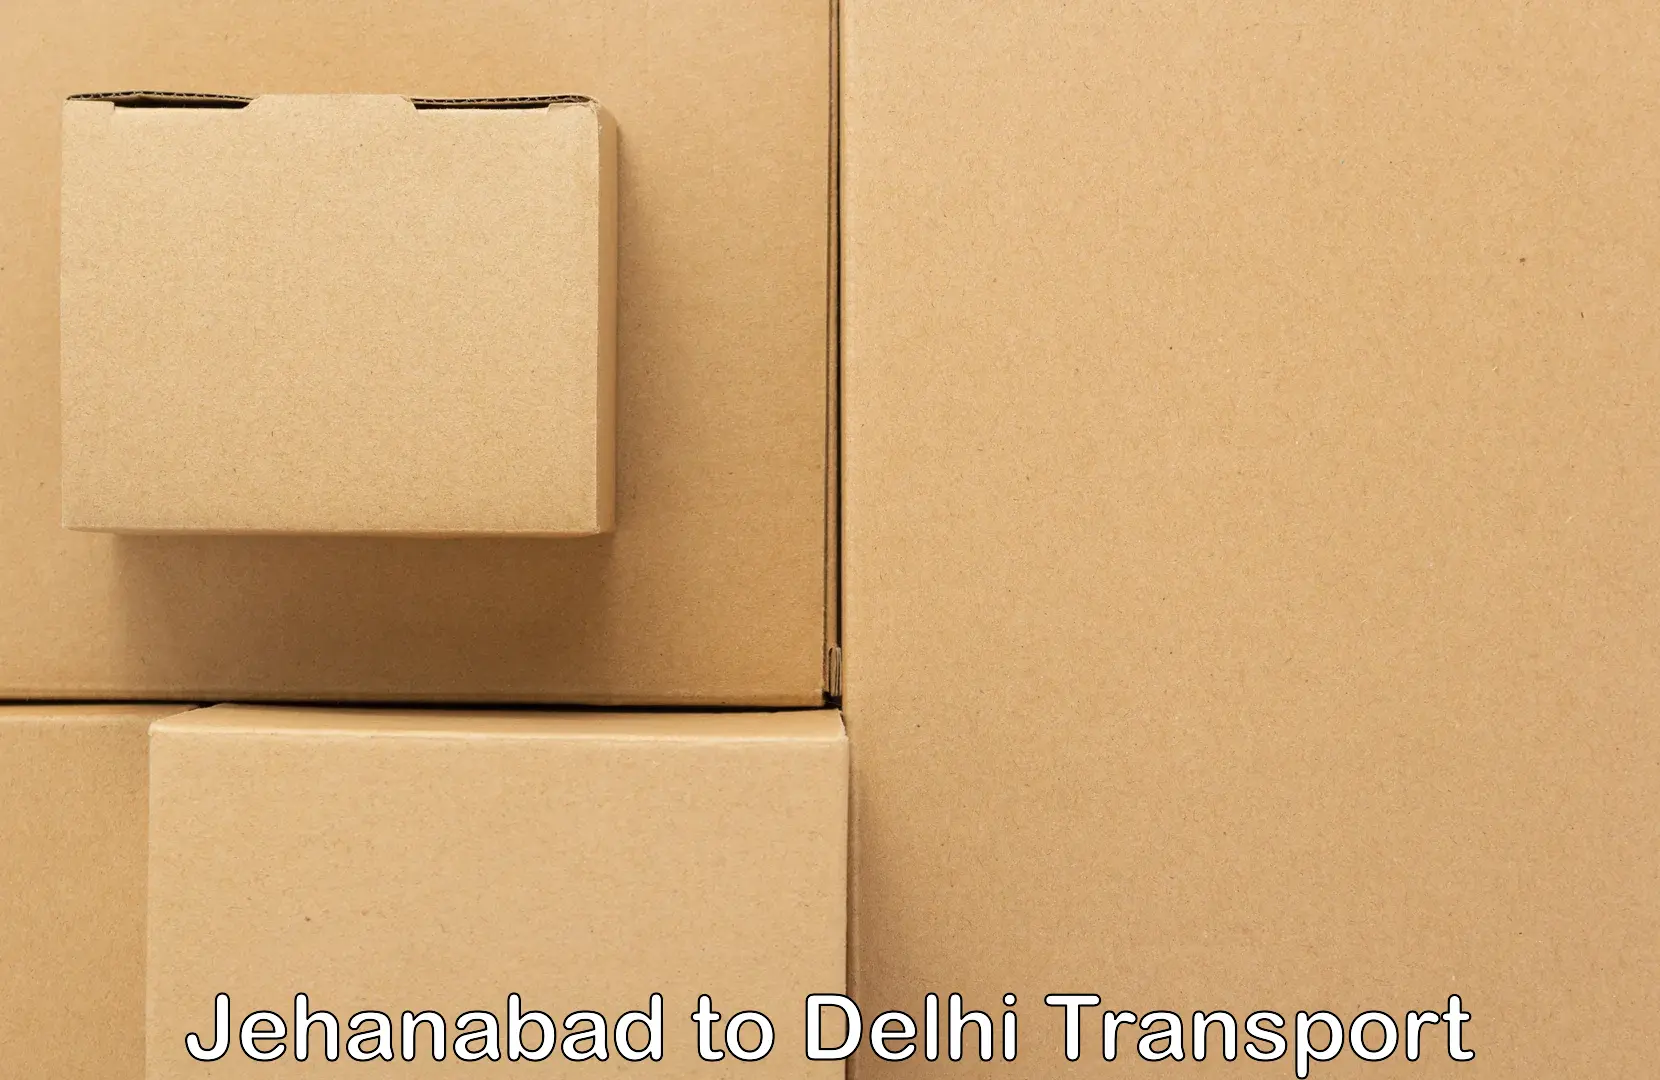 Online transport service Jehanabad to NCR